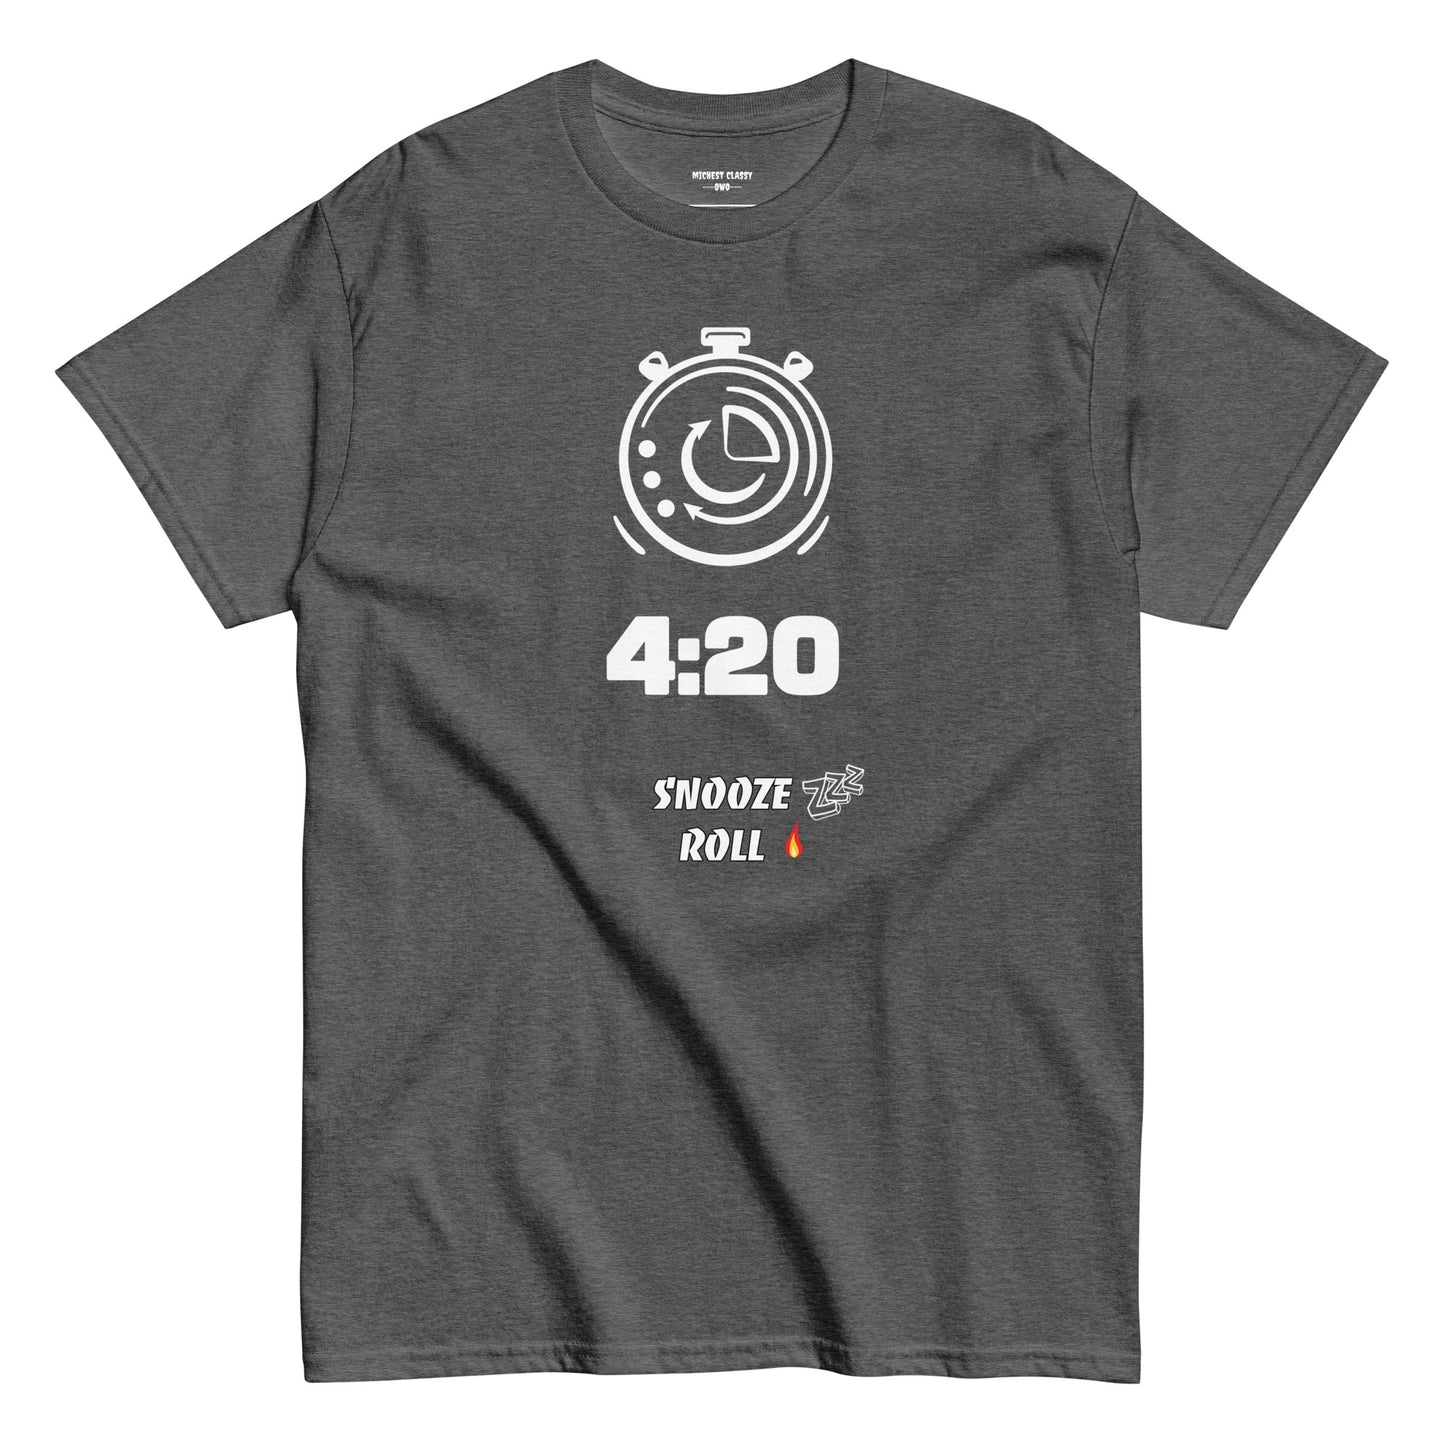 Weed Time Classic Unisex T-Shirt